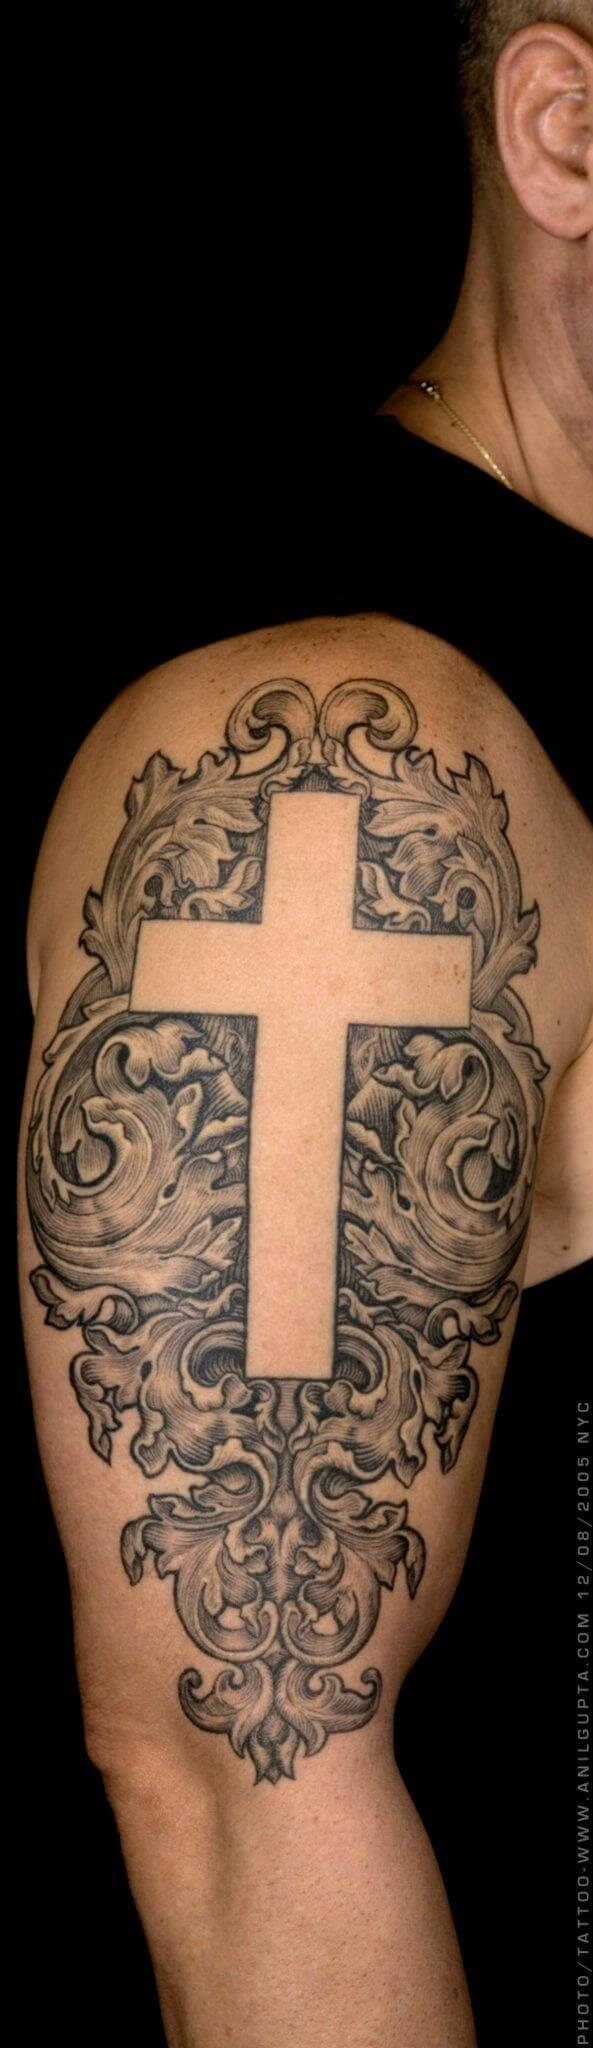 56 Best Cross Tattoos For Men Improb with dimensions 593 X 2048